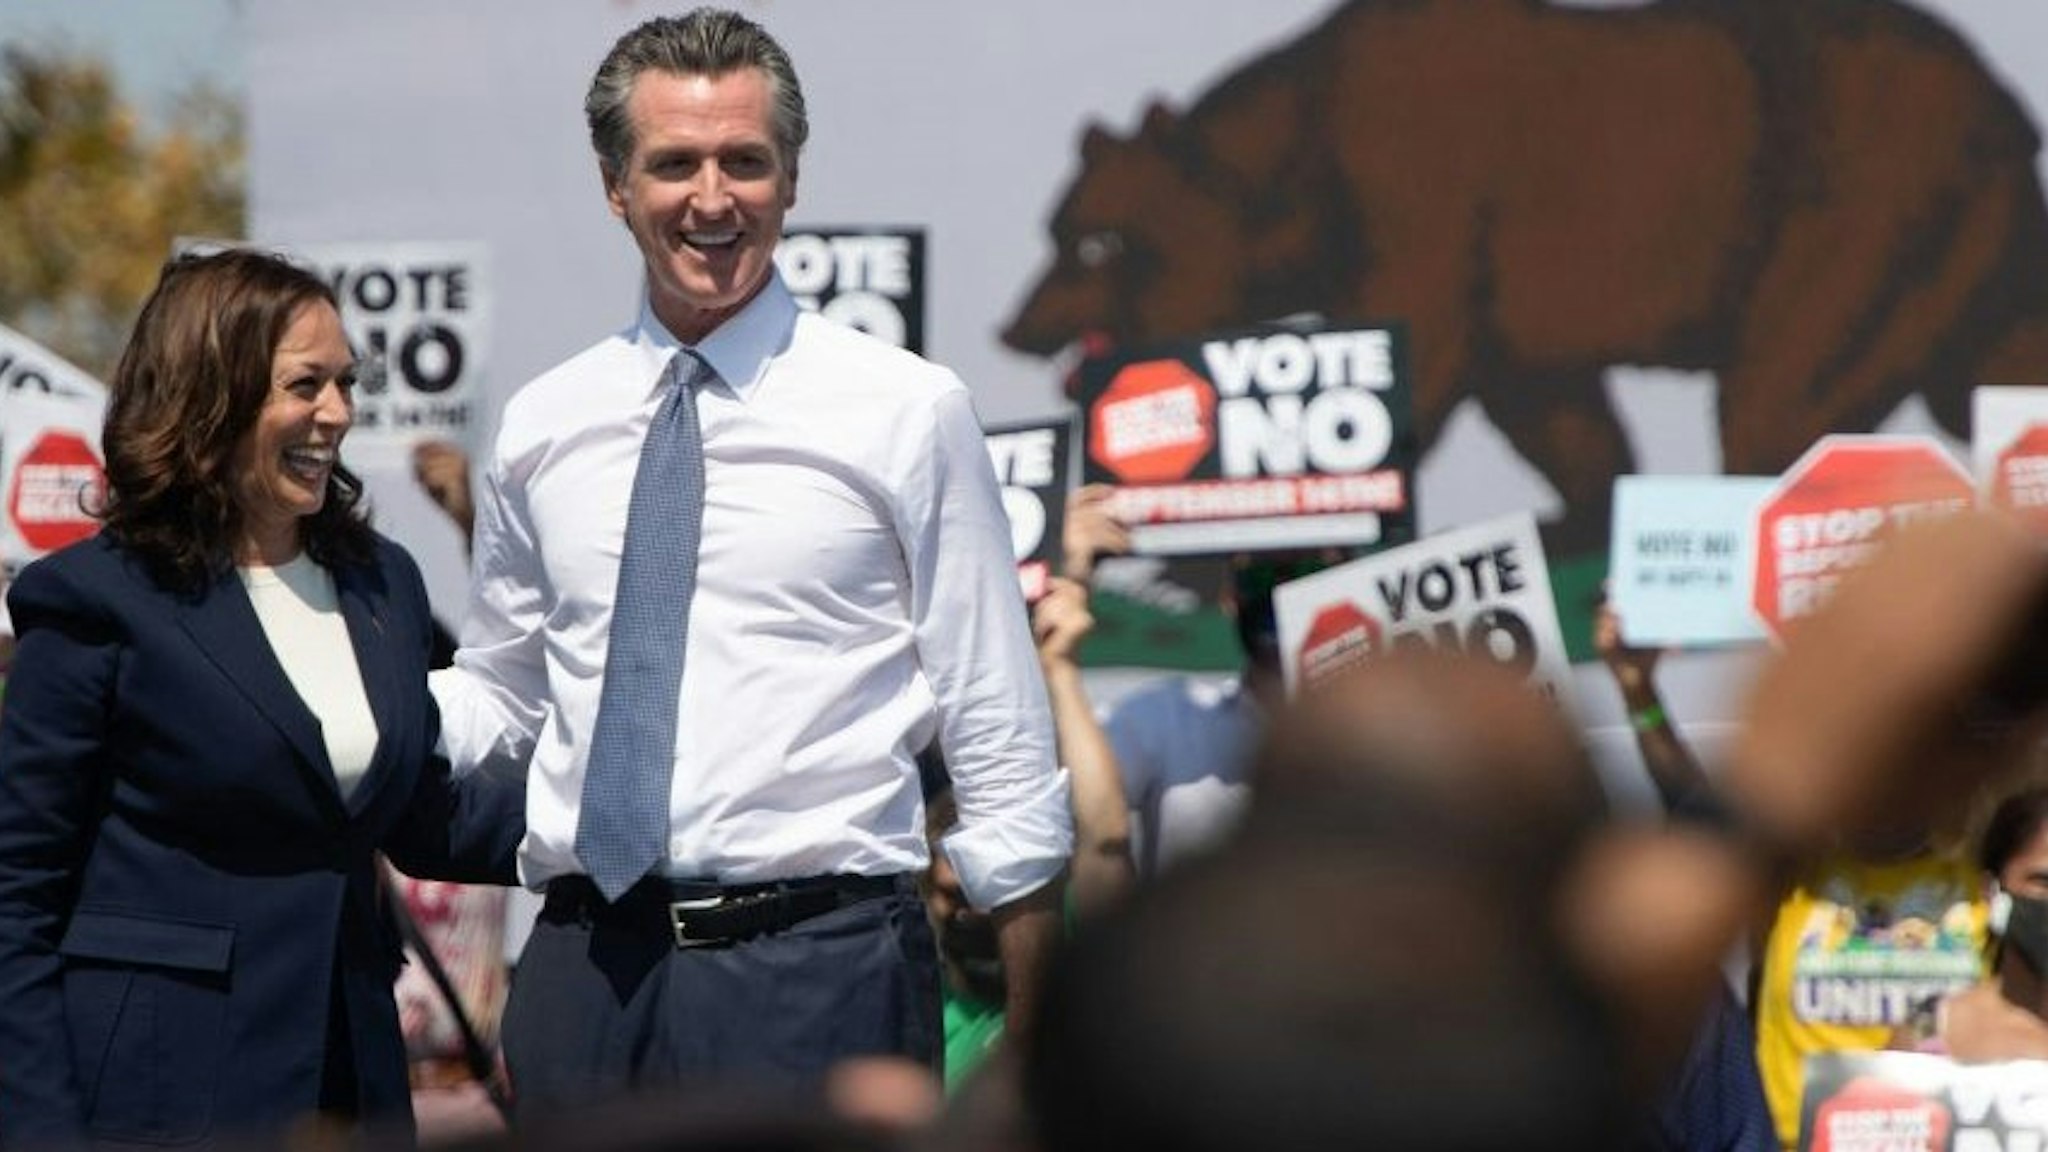 US Vice President Kamala Harris (L) stands with California Governor Gavin Newsom during a campaign event against his recall election at the IBEW-NECA Joint Apprenticeship Training Center in San Leandro, California, September 8, 2021. (Photo by SAUL LOEB / AFP) (Photo by